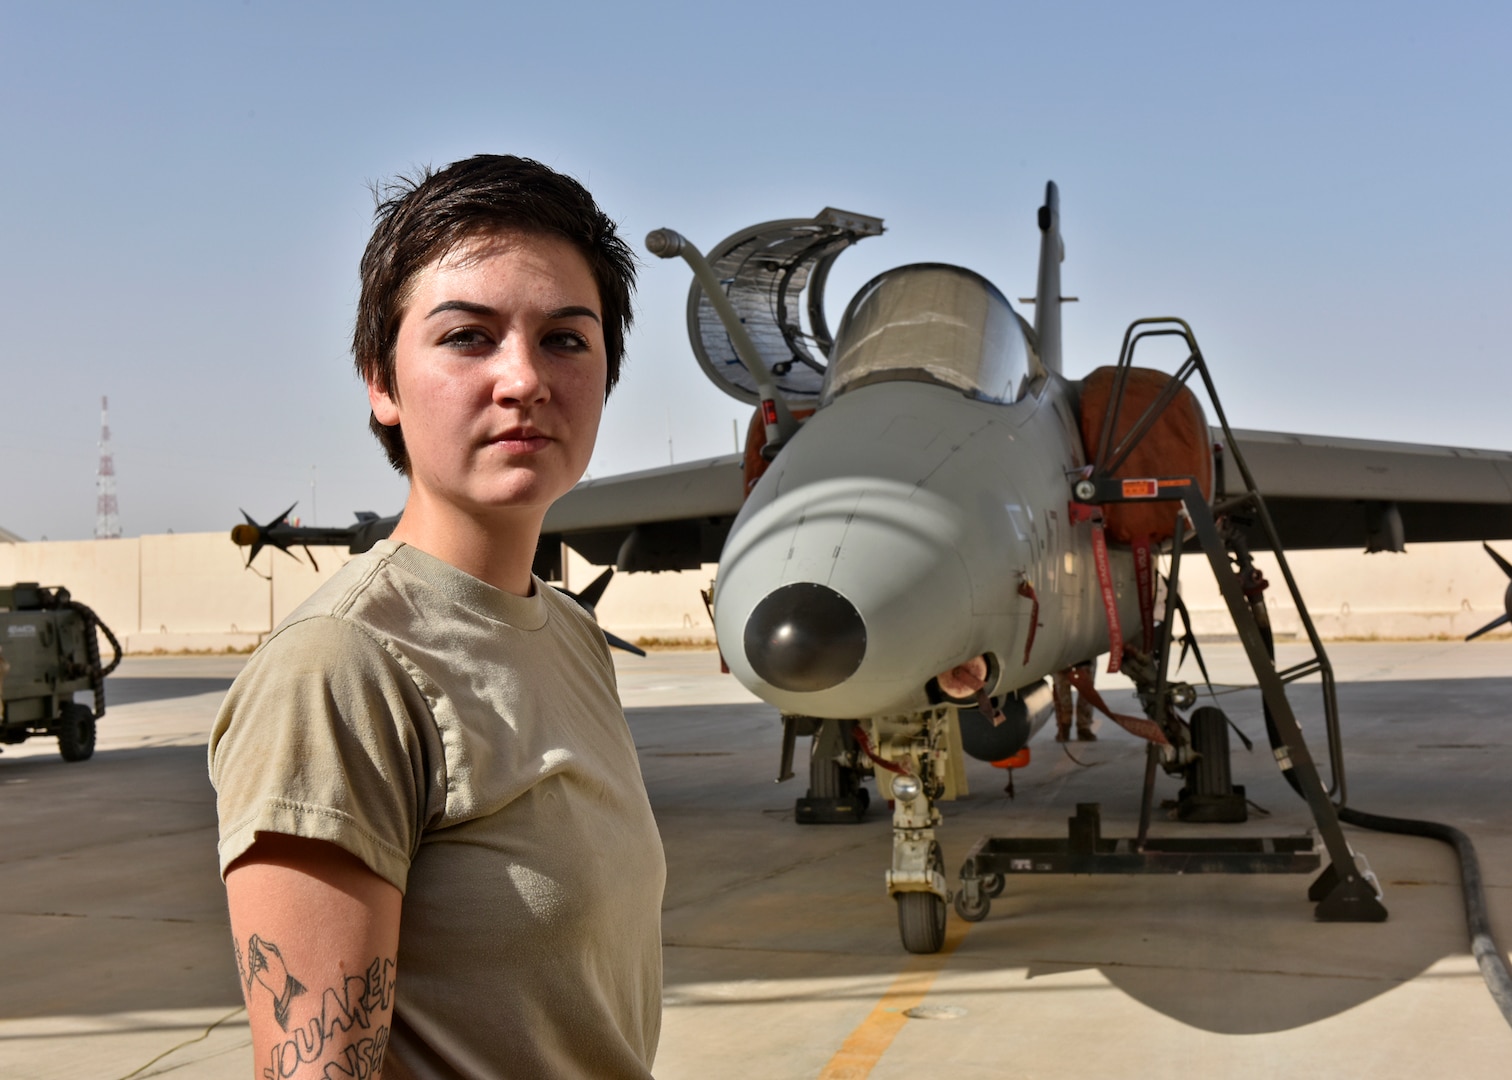 Airman 1st Class Olivia Faucett, 407th Expeditionary Logistic Readiness Squadron petroleum, oil and lubricants flight fuel distribution technician, monitors the amount of gallons pumping to an Italian AMX May 15, 2017, in Southwest Asia. Fuel technicians maintain all POL substances, from diesel and gasoline to jet fuel and liquid oxygen. These materials play a vital role in delivering airpower to the fight against ISIS as part of Operation Inherent Resolve. The team here at the 407th Air Expeditionary Group supplies U.S. Marine Corps, Italian Air Force and Polish Air Force. (U.S. Air Force photo by Senior Airman Ramon A. Adelan)